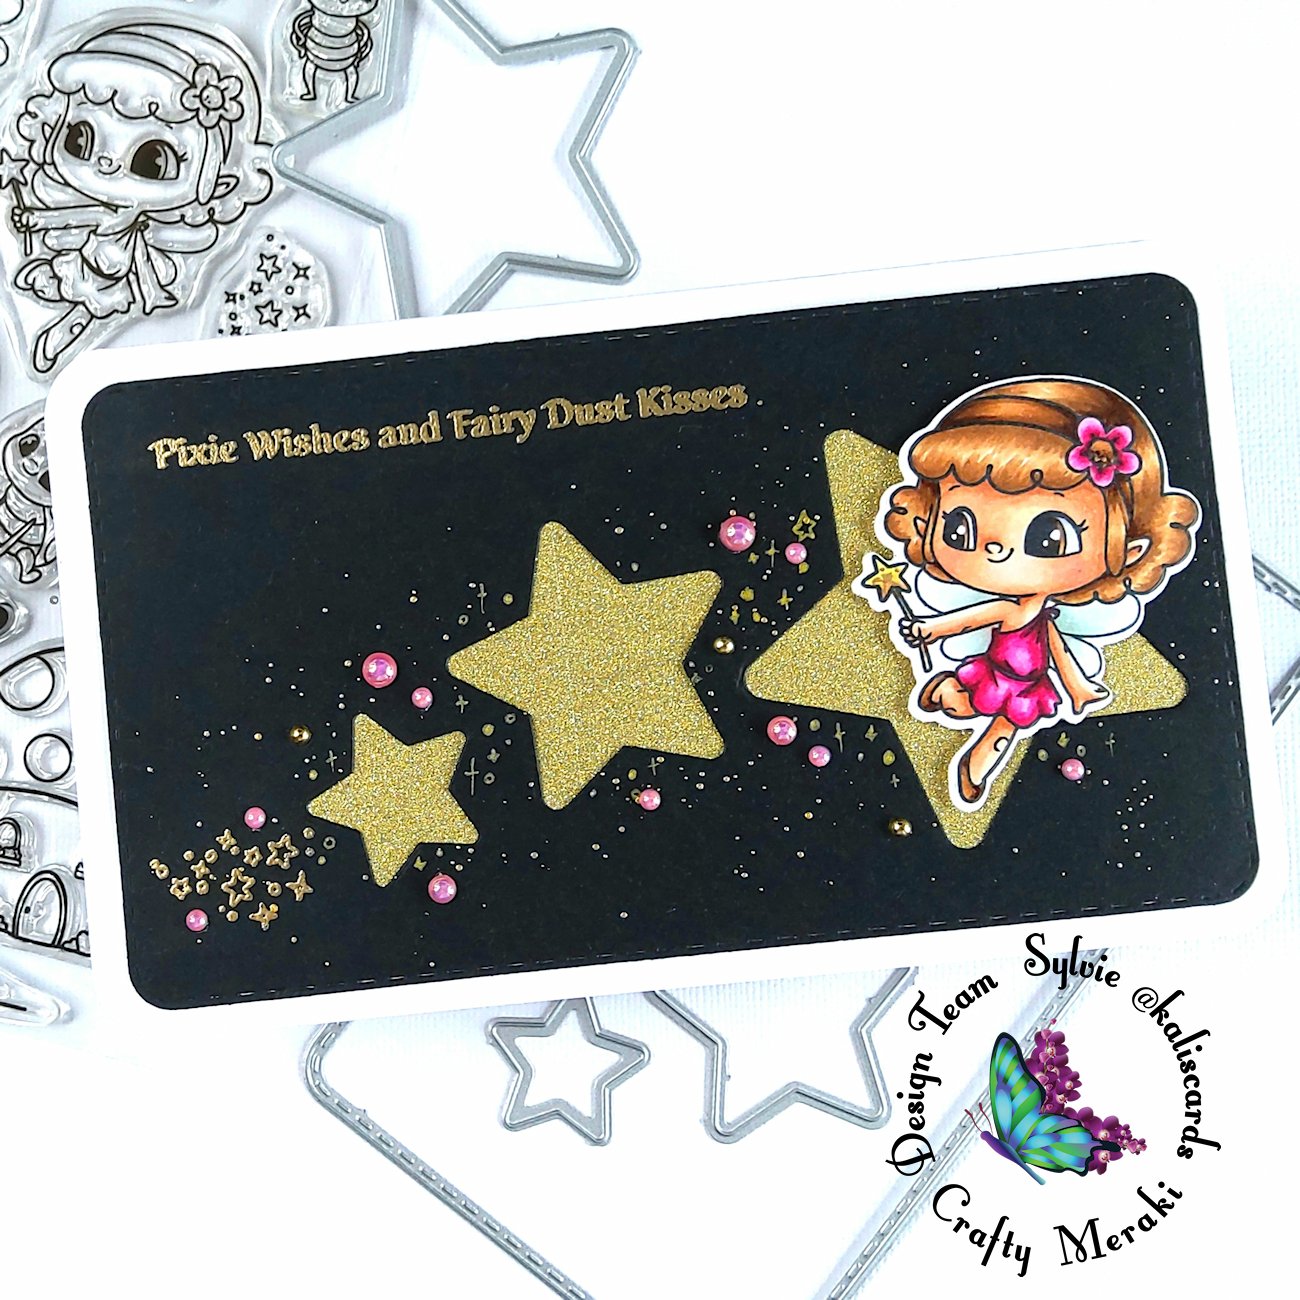 Pixie Wishes and Fairy Dust Kisses by Sylvie @Kaliscards